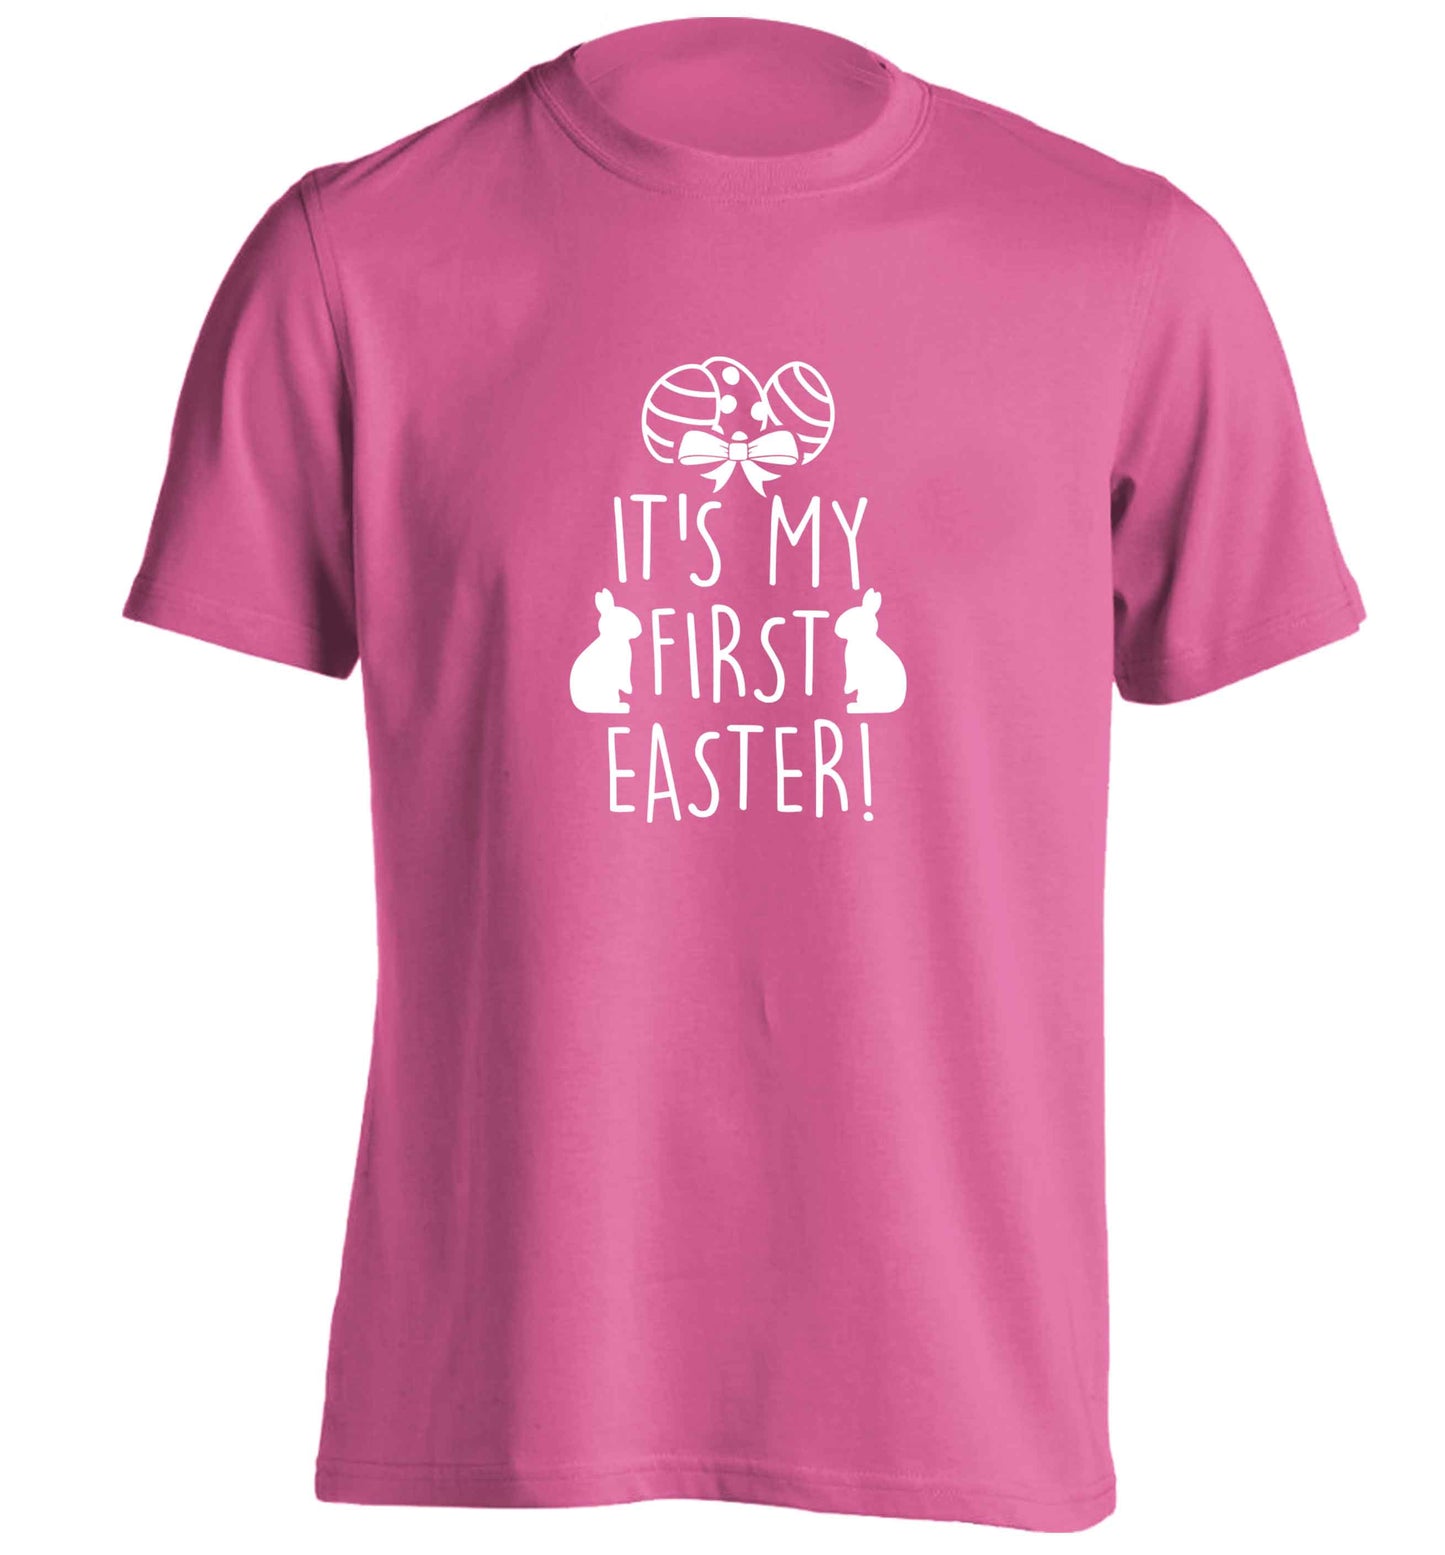 It's my first Easter adults unisex pink Tshirt 2XL